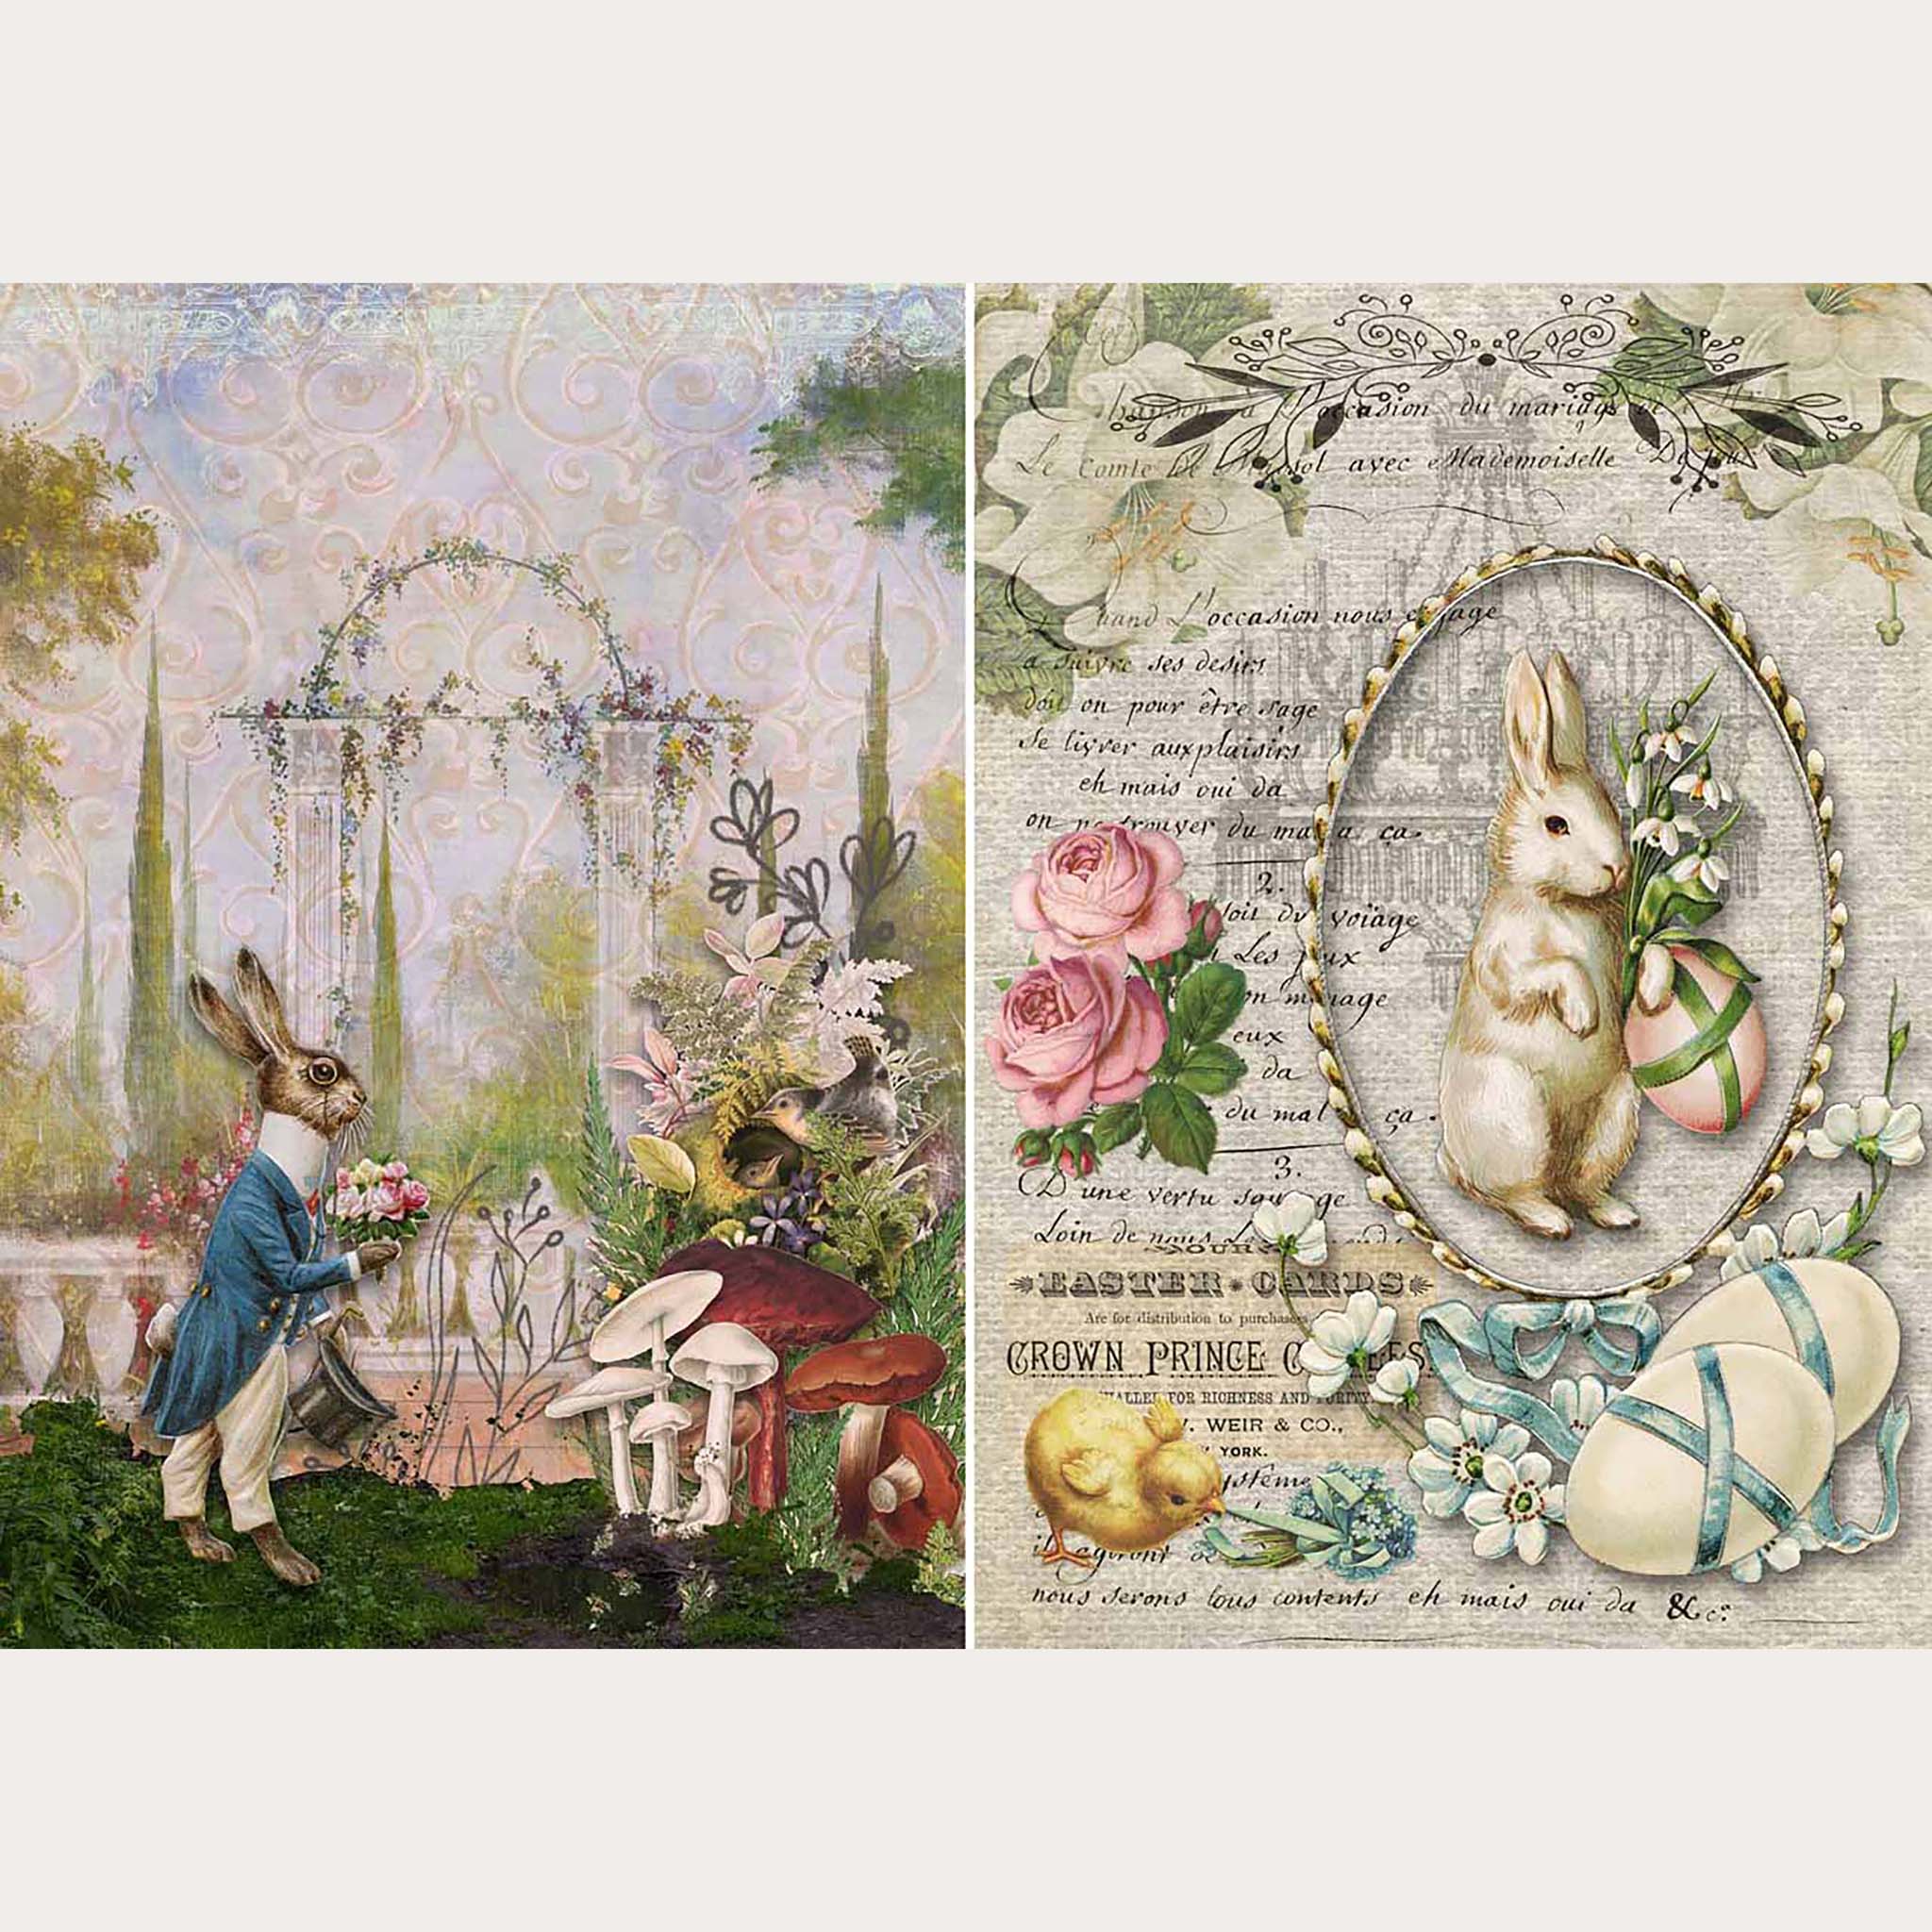 A4 rice paper that features 2 scenes of bunnies. One is wearing a tail coat, pants, and monocle standing in a garden. The other is a spring bunny in a frame with a pink egg surrounded by a yellow chick, more eggs, and pink roses against a script letter background. White borders are on the top and bottom.